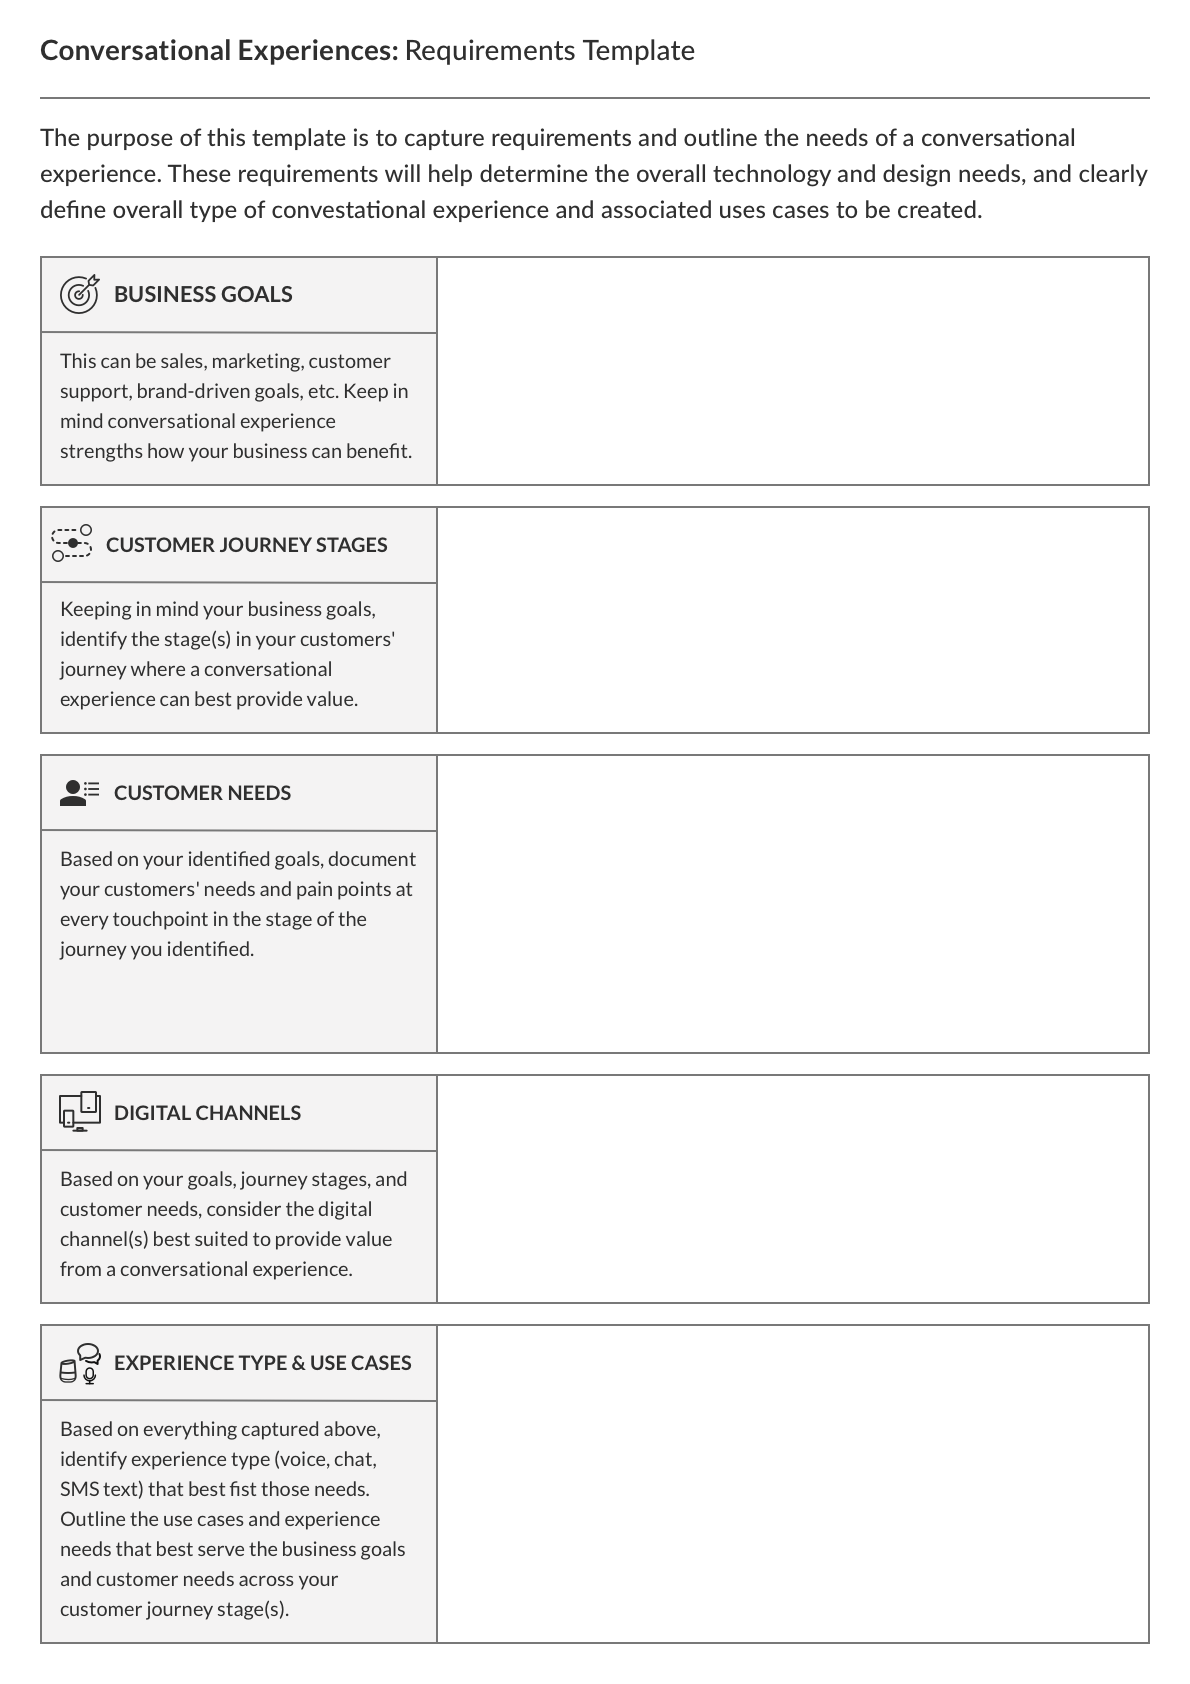 Conversational Experience: Requirements Template